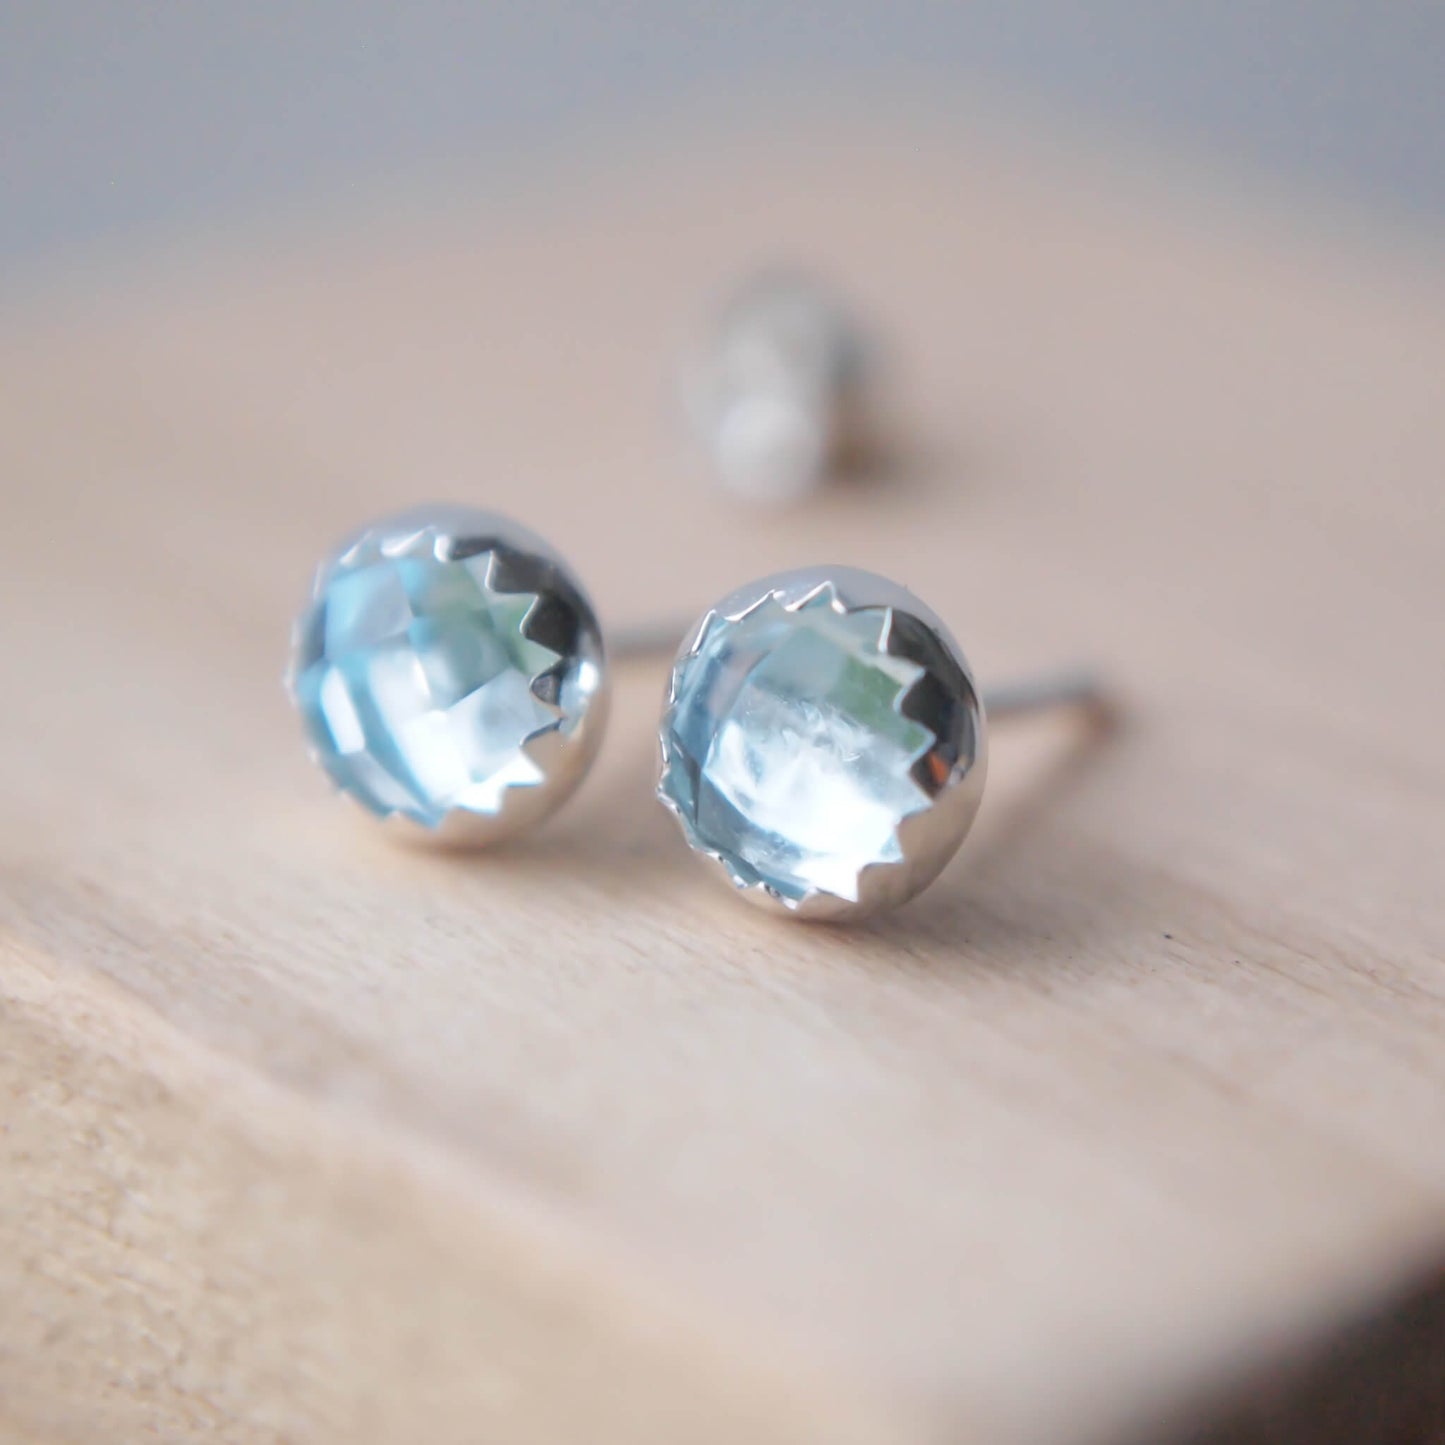 March Birthstone Blue Topaz Earrings in a pale blue facet cut gemstone with a simple silver surround with a jagged edge. Handmade in Scotland by maram jewellery